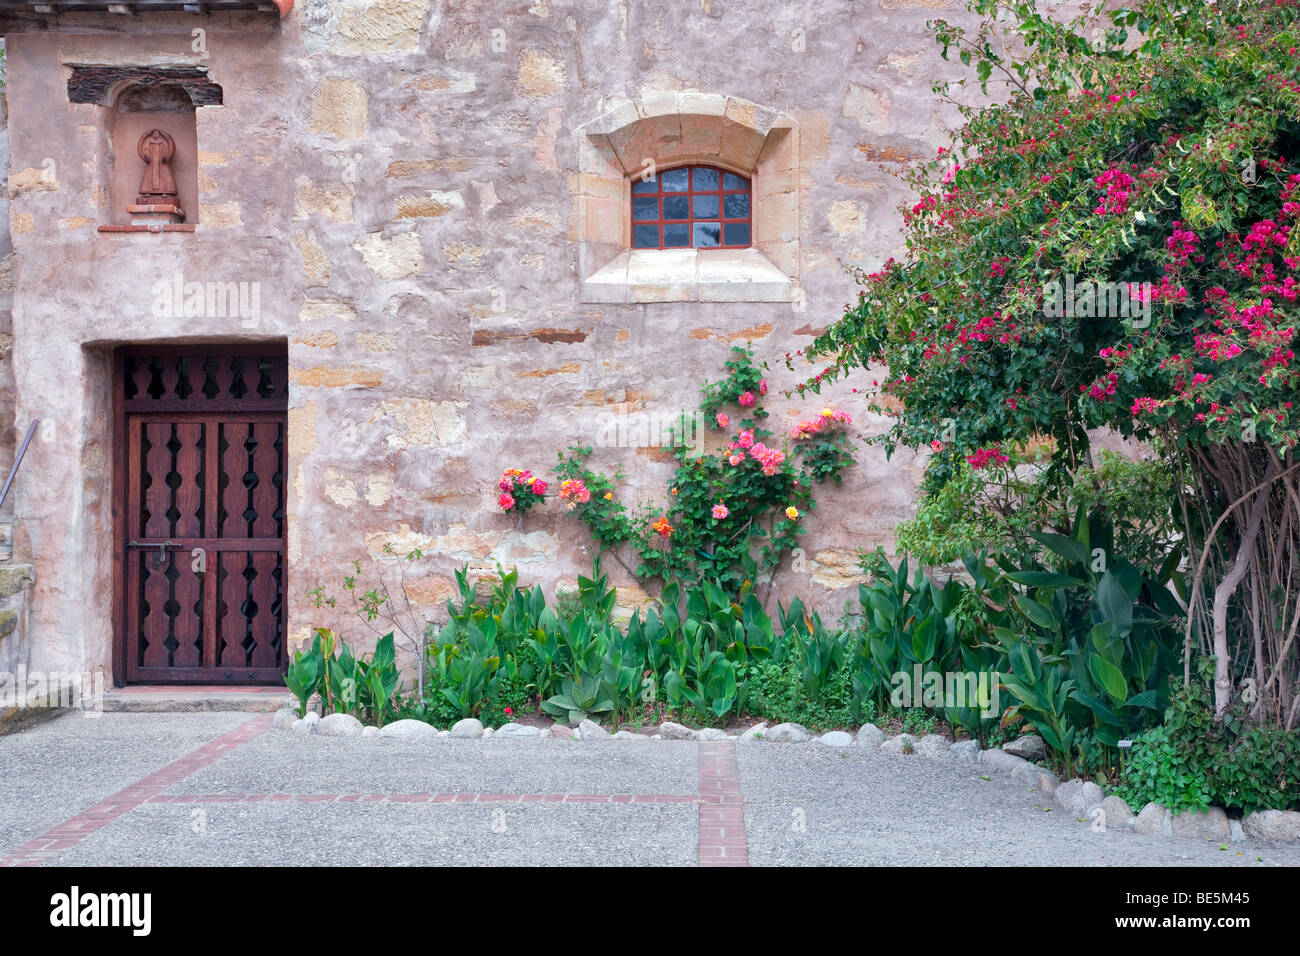 Gardens and courtyard at the Carmel Mission. Carmel by the Sea, California. Stock Photo